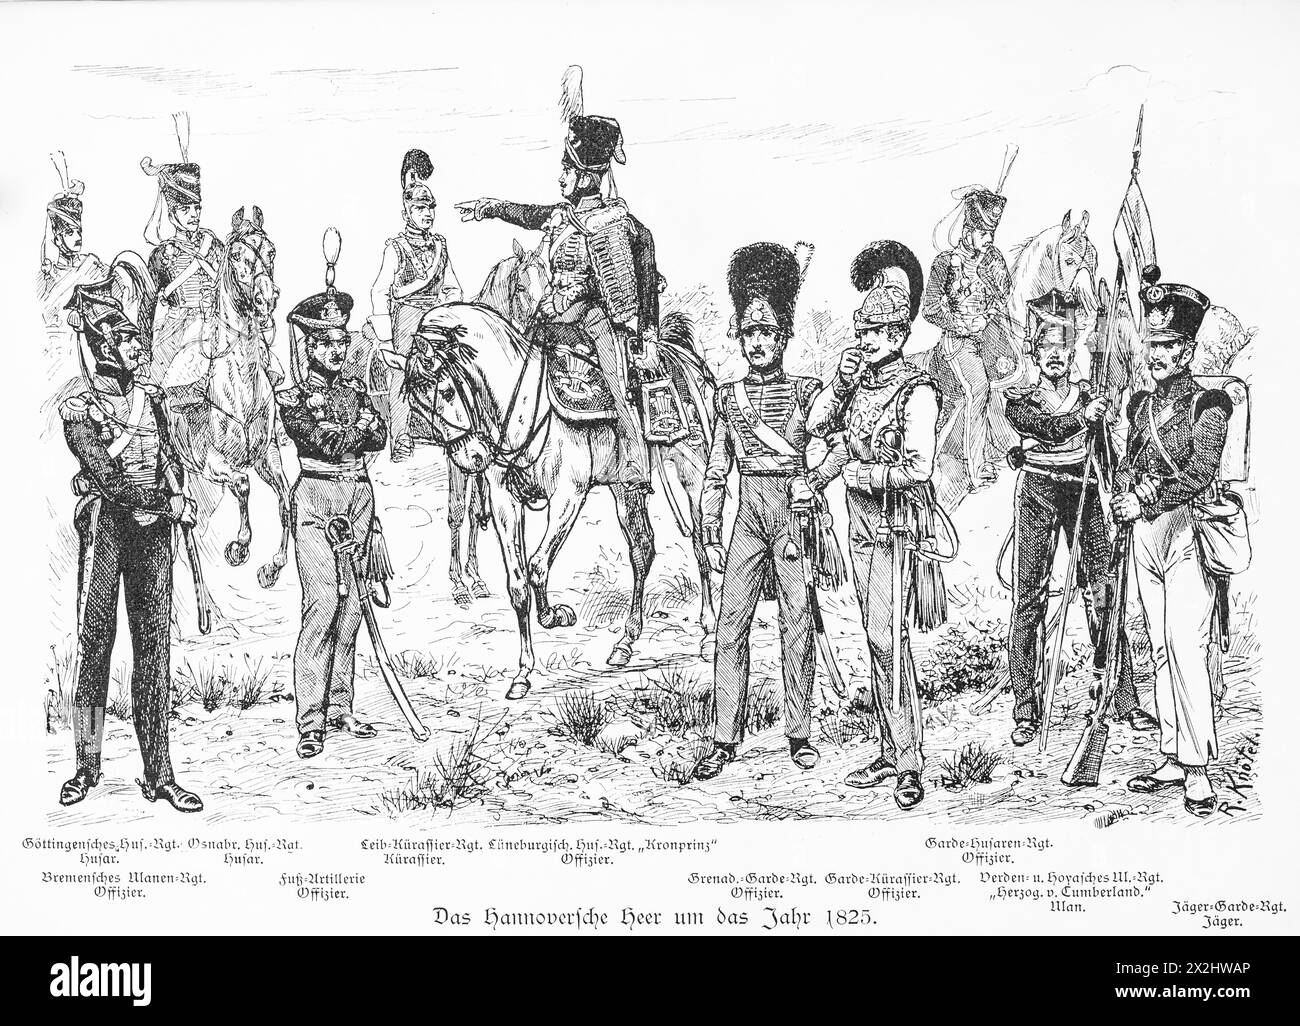 Historical illustration of uniforms around 1825, soldiers and officers with flags, weapons and horses, Goettingische, Bremische, Osnabruecker Stock Photo